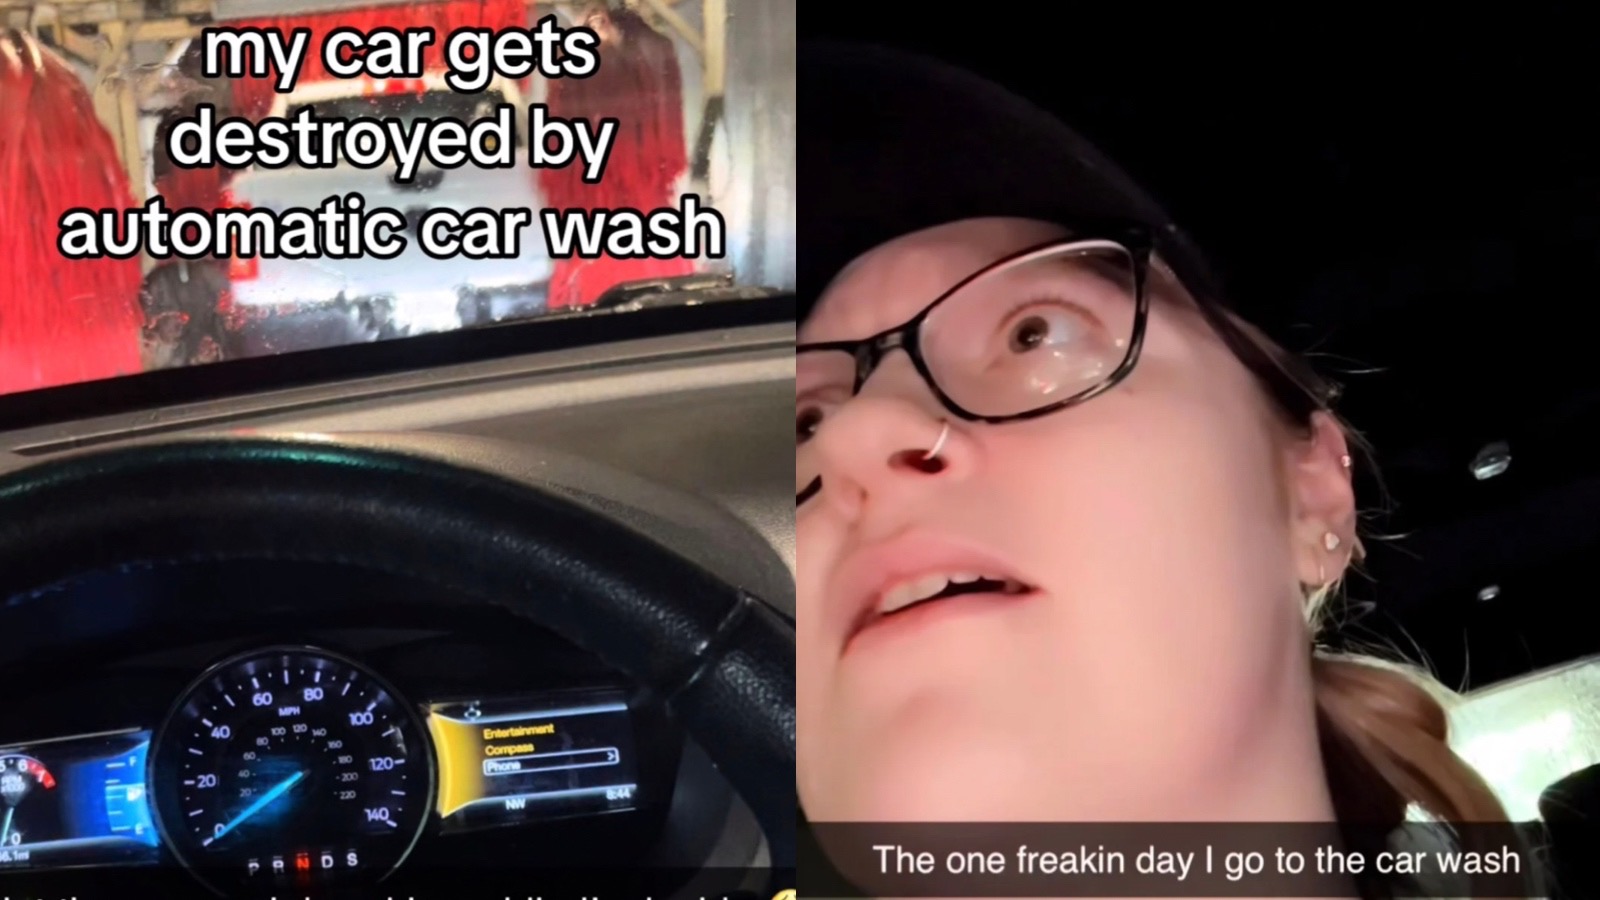 Woman distraught after automatic car wash “destroys” her vehicle